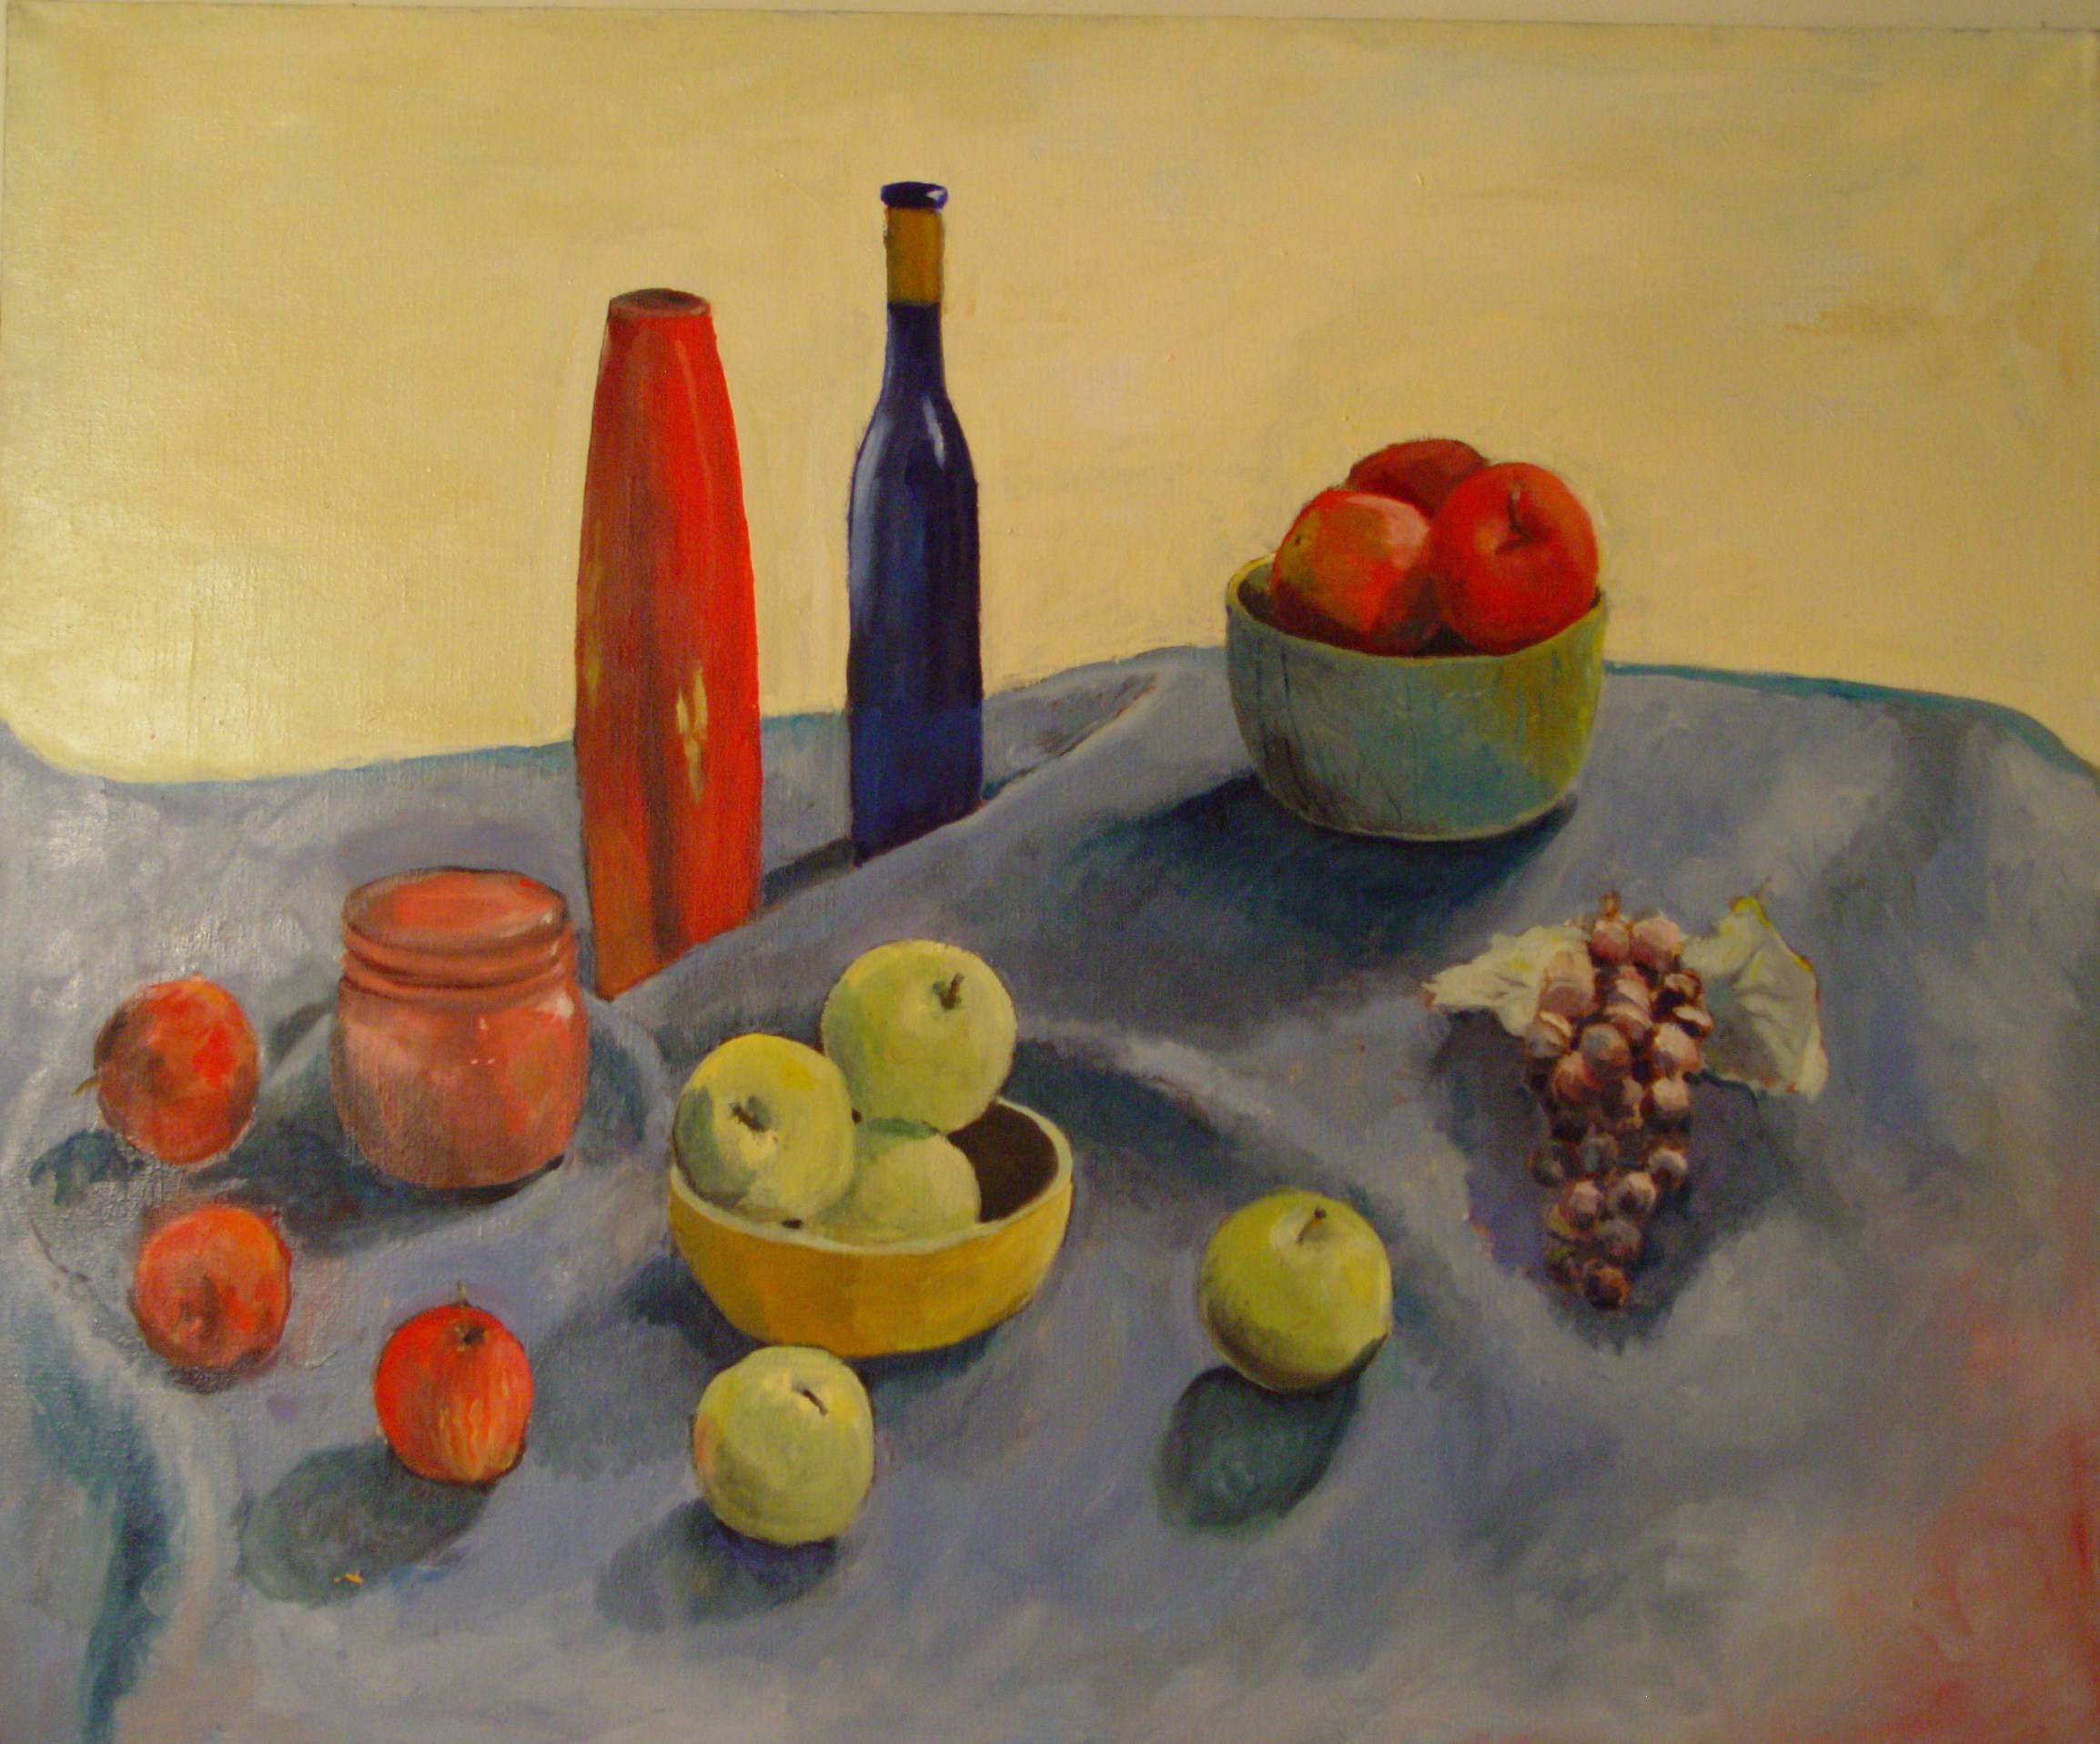 Apples, Grapes and Vases on Blue Cloth